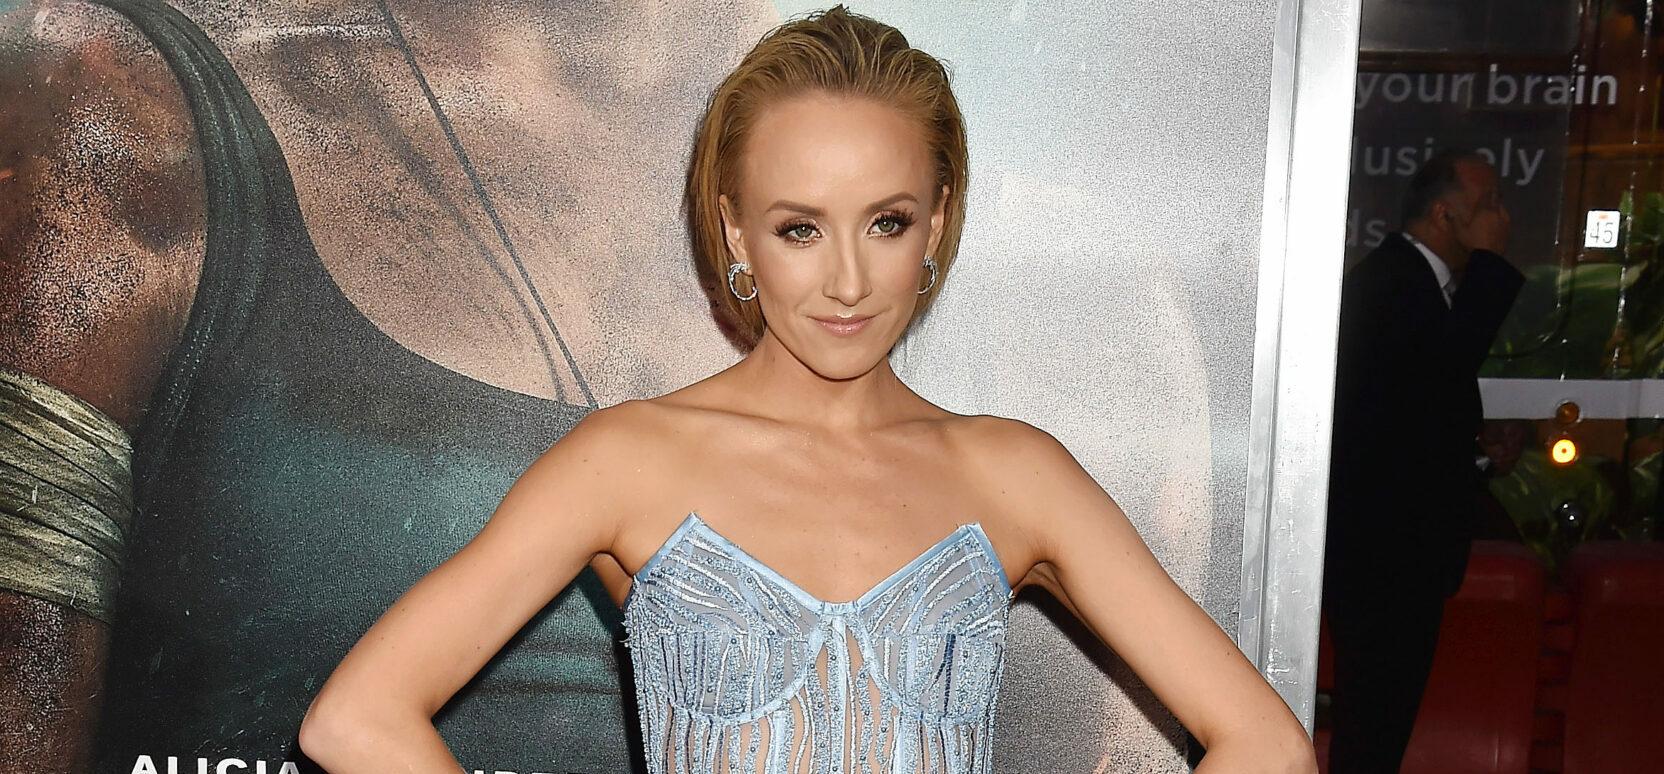 Gymnast Nastia Liukin Finally Releases Her Debut Fall Fashion Collection